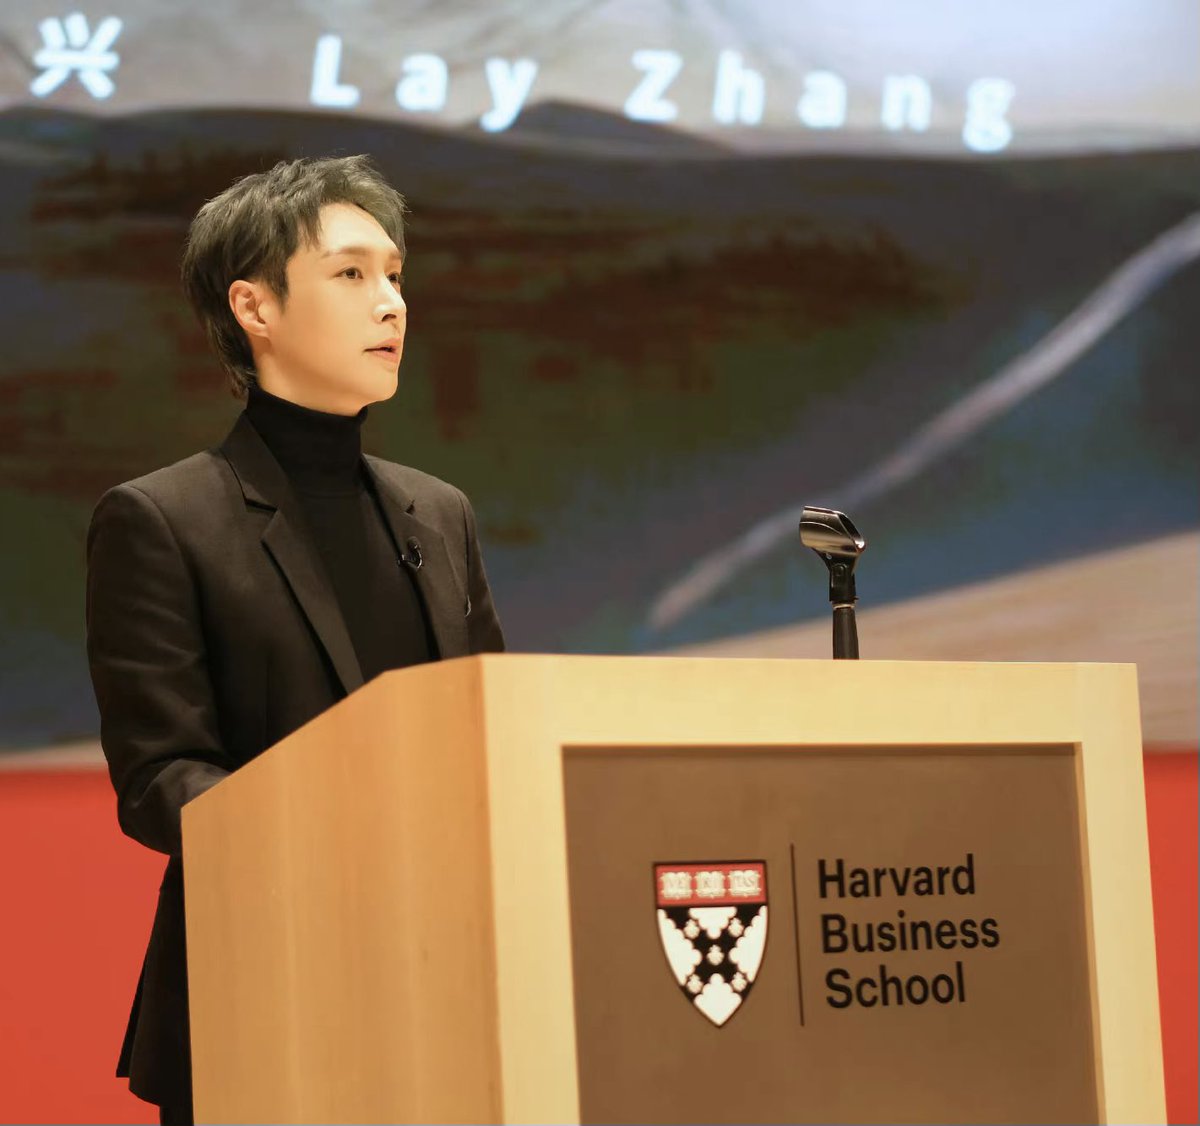 I feel honored to have been able to share my thoughts about M-POP music at the Harvard Business School. If you ever have any thoughts or suggestions feel free to comment anytime!